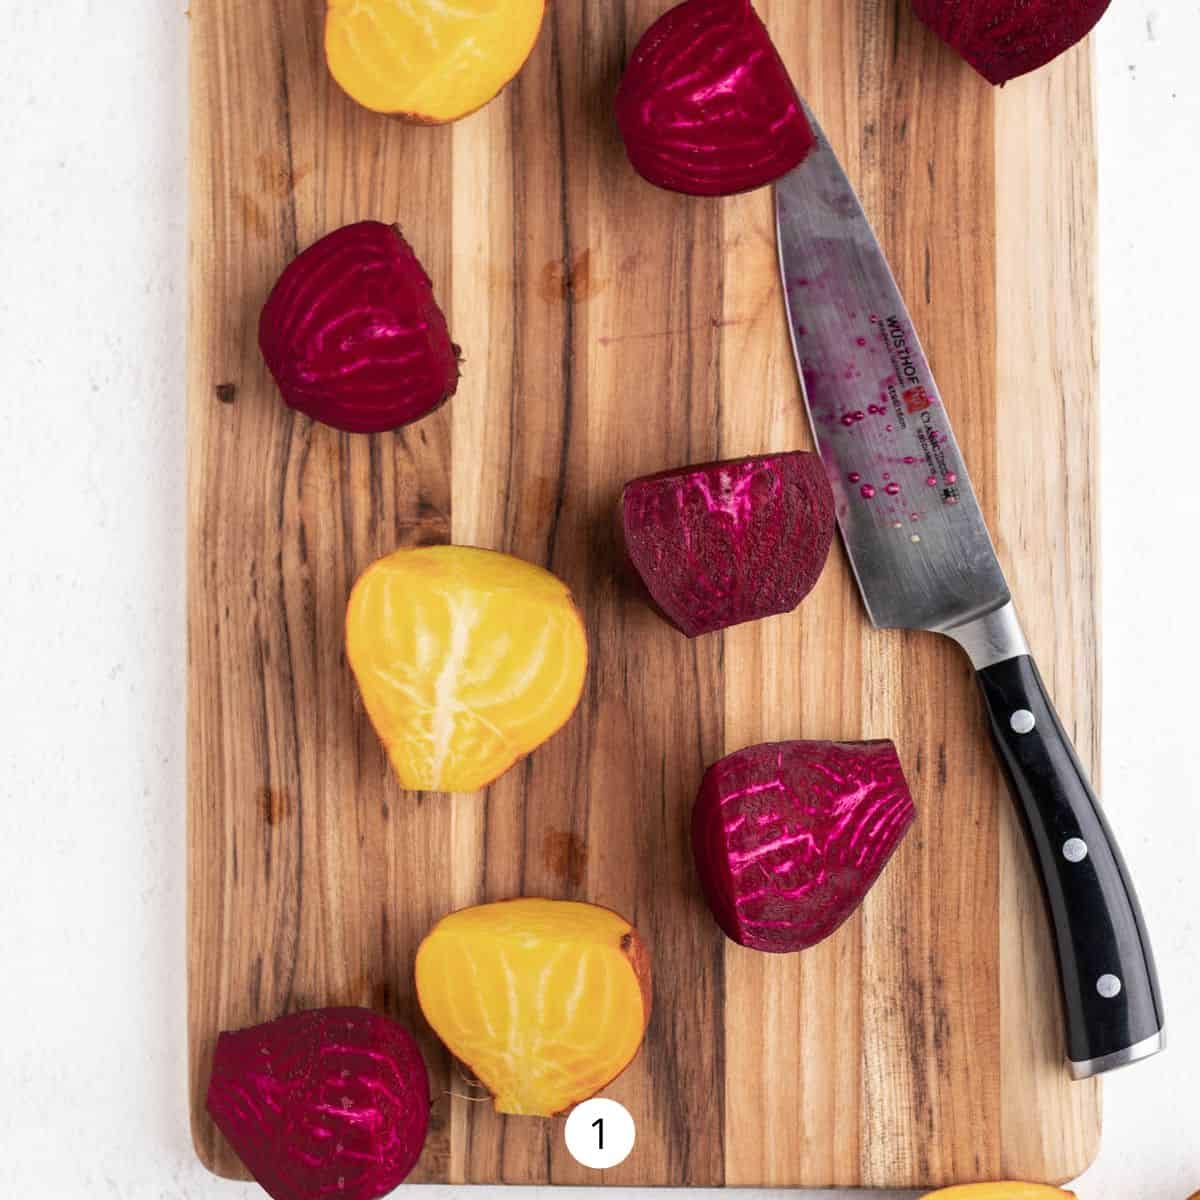 Cutting red and yellow beets in half lengthwise with a knife.